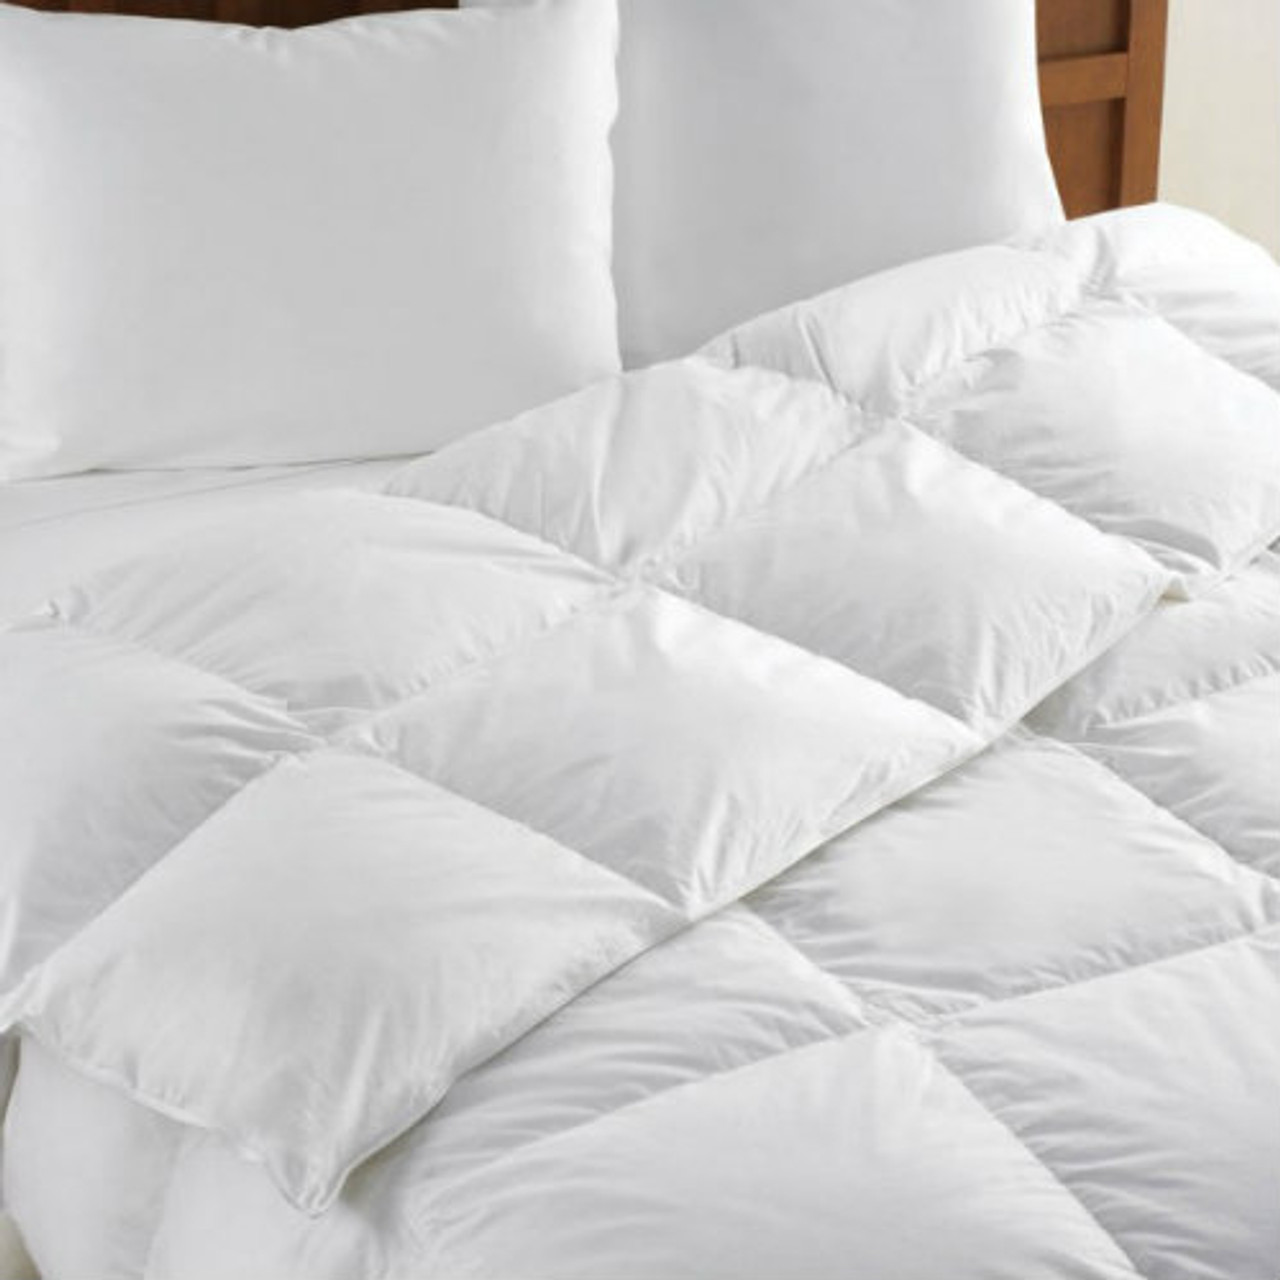 Luxury Down Comforter Hotelstoyou Com Wholesale Pricing Available